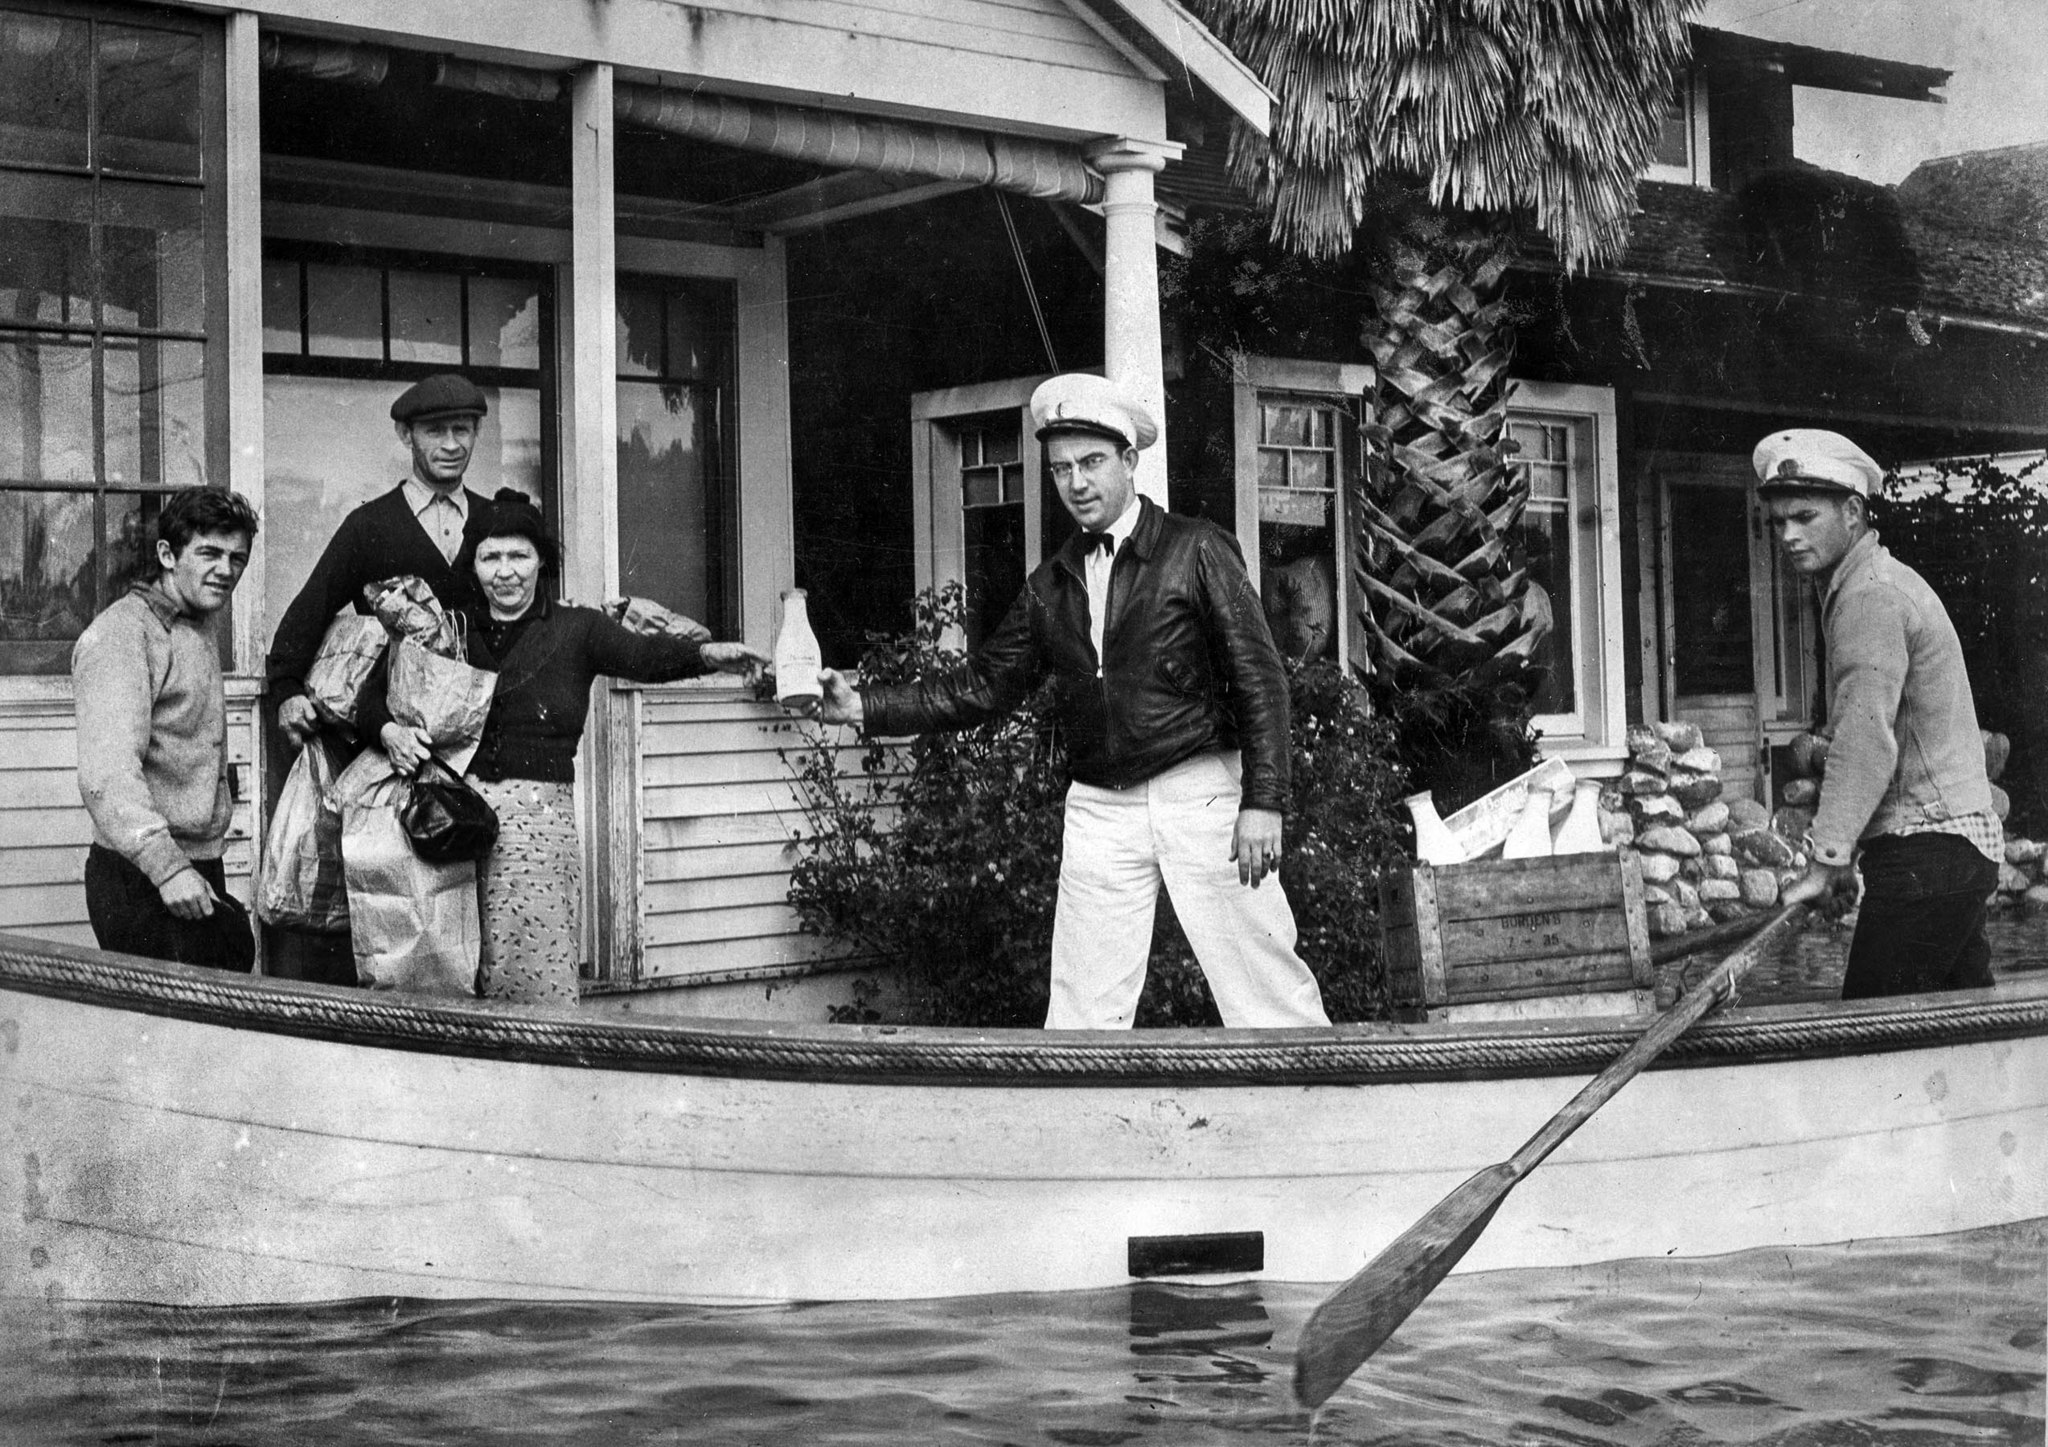 March 3, 1938: Milkman Ray J. Henville secured himself a boat and boatman and made all deliveries on